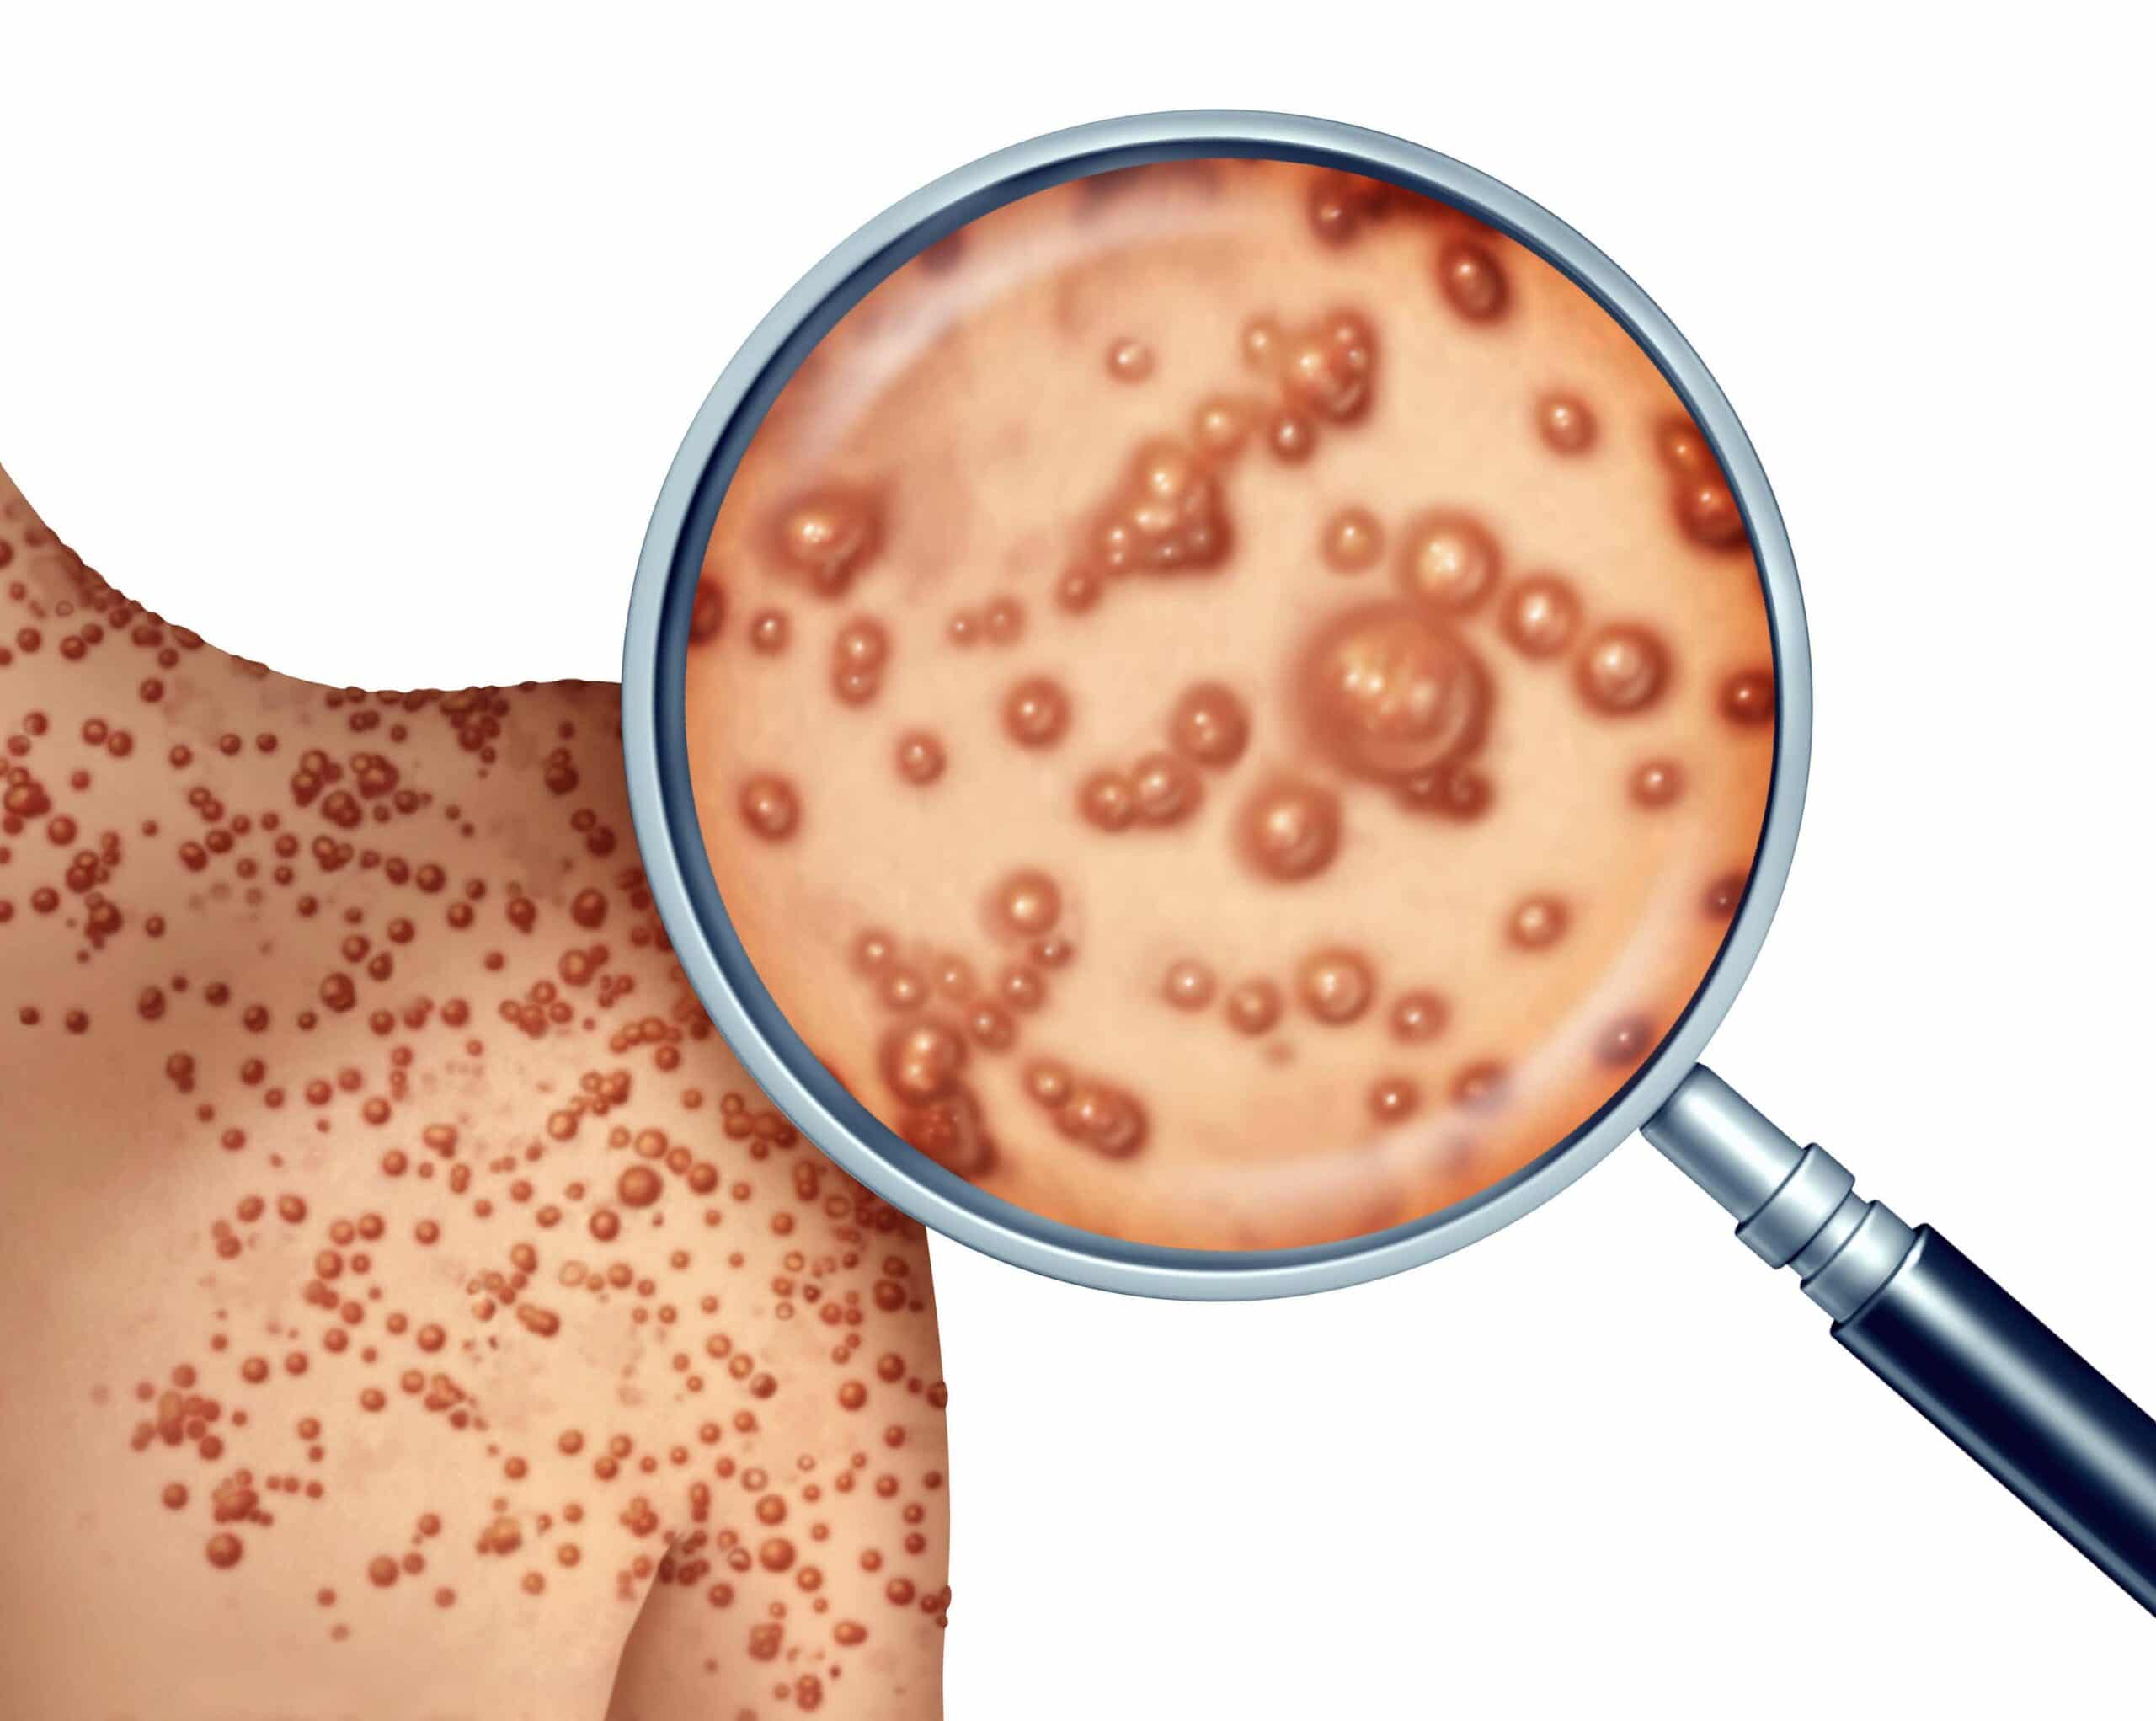 How To Tell The Difference Between Monkeypox And Chickenpox In Your Child